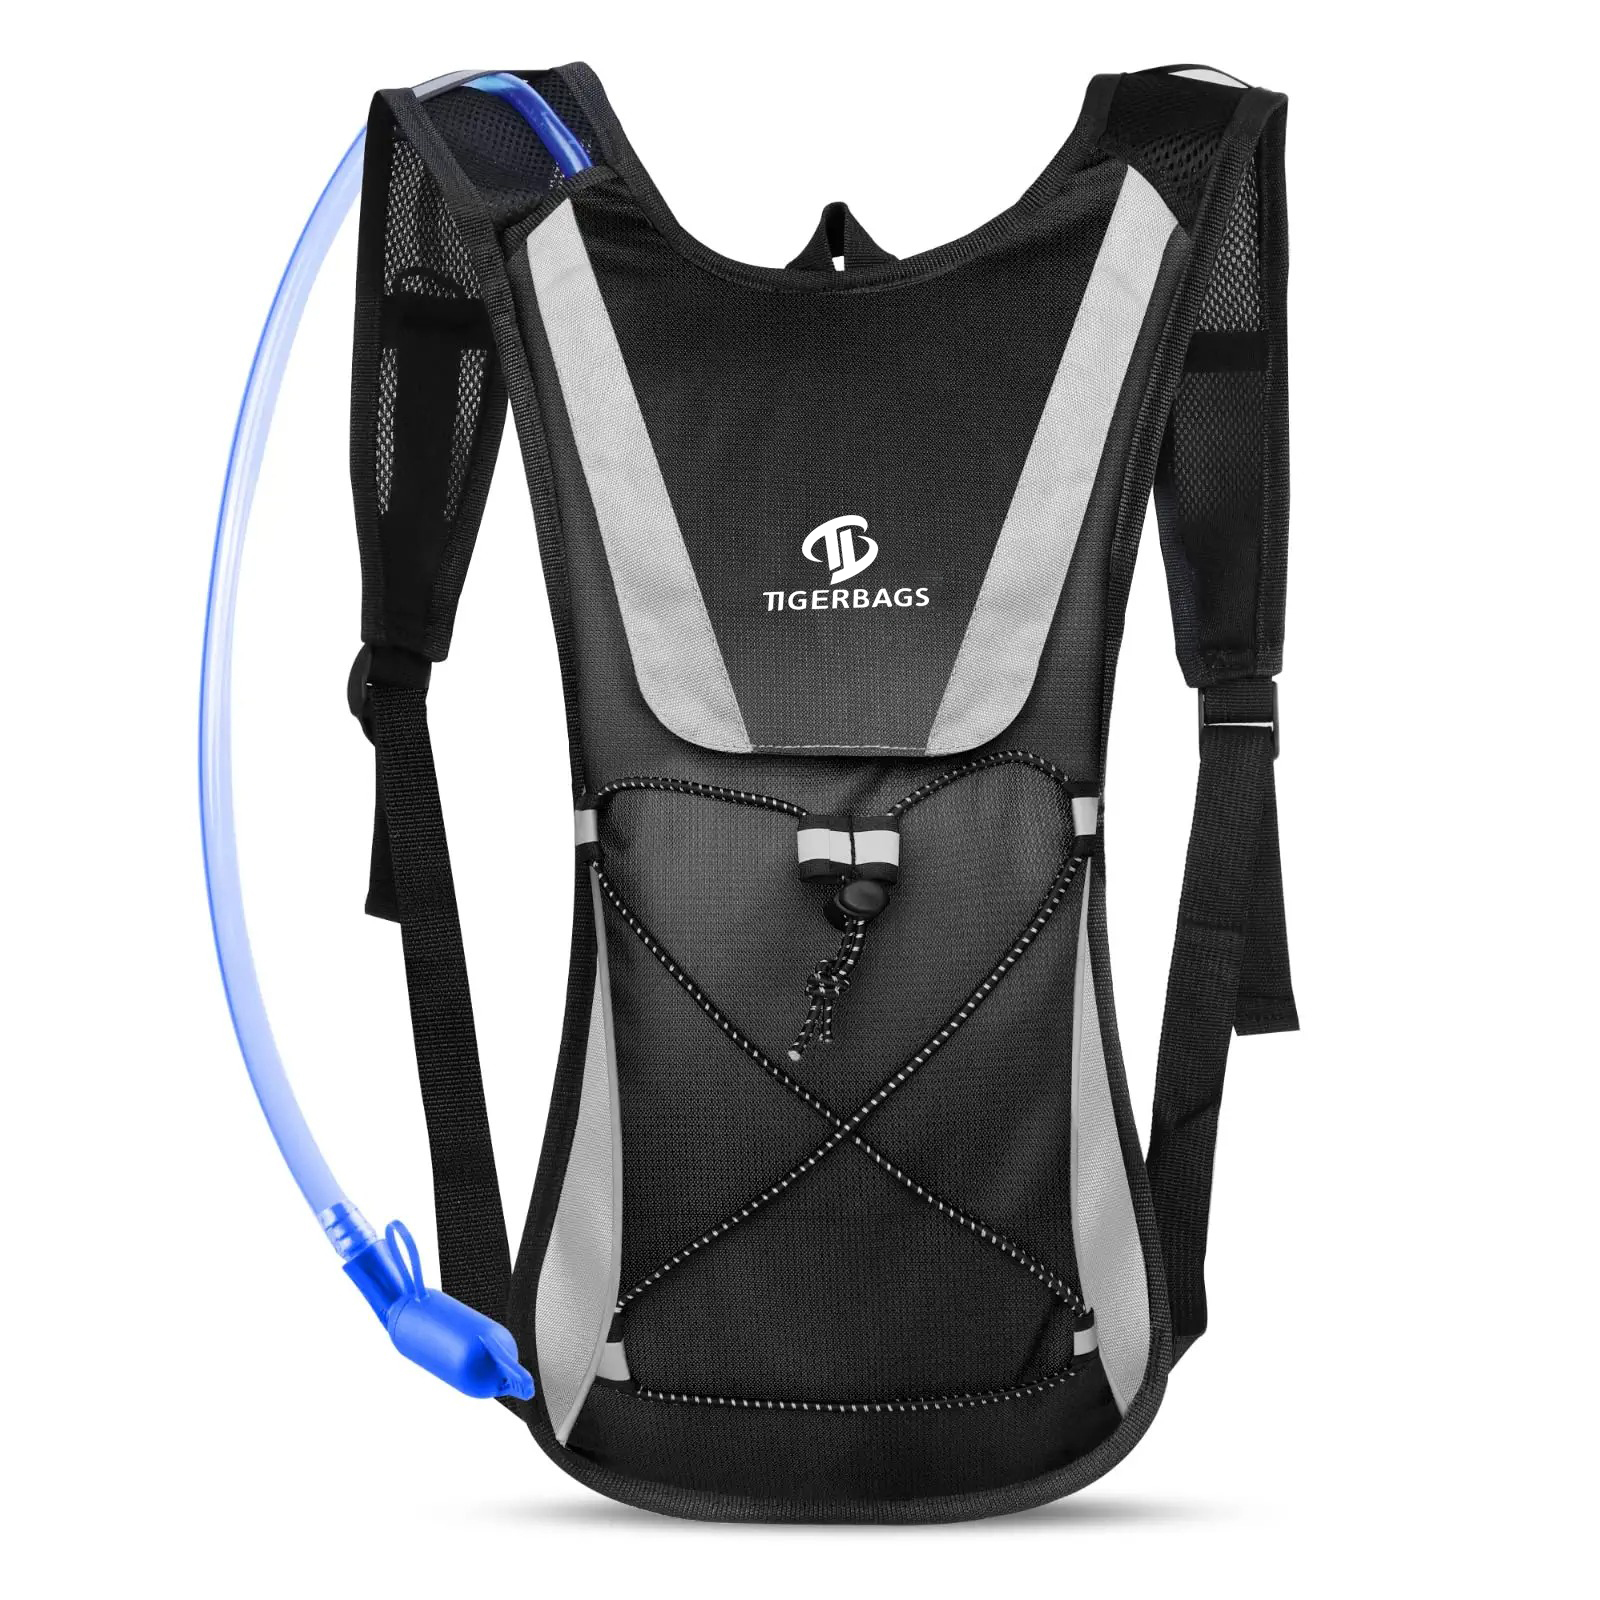 I-Hydration Pack ene-2L Hydration Bladder Lightweight Insulation Water Rucksack Backpack Bladder Bag Cycling Bicycle Bike/Hiking Climbing Pouch